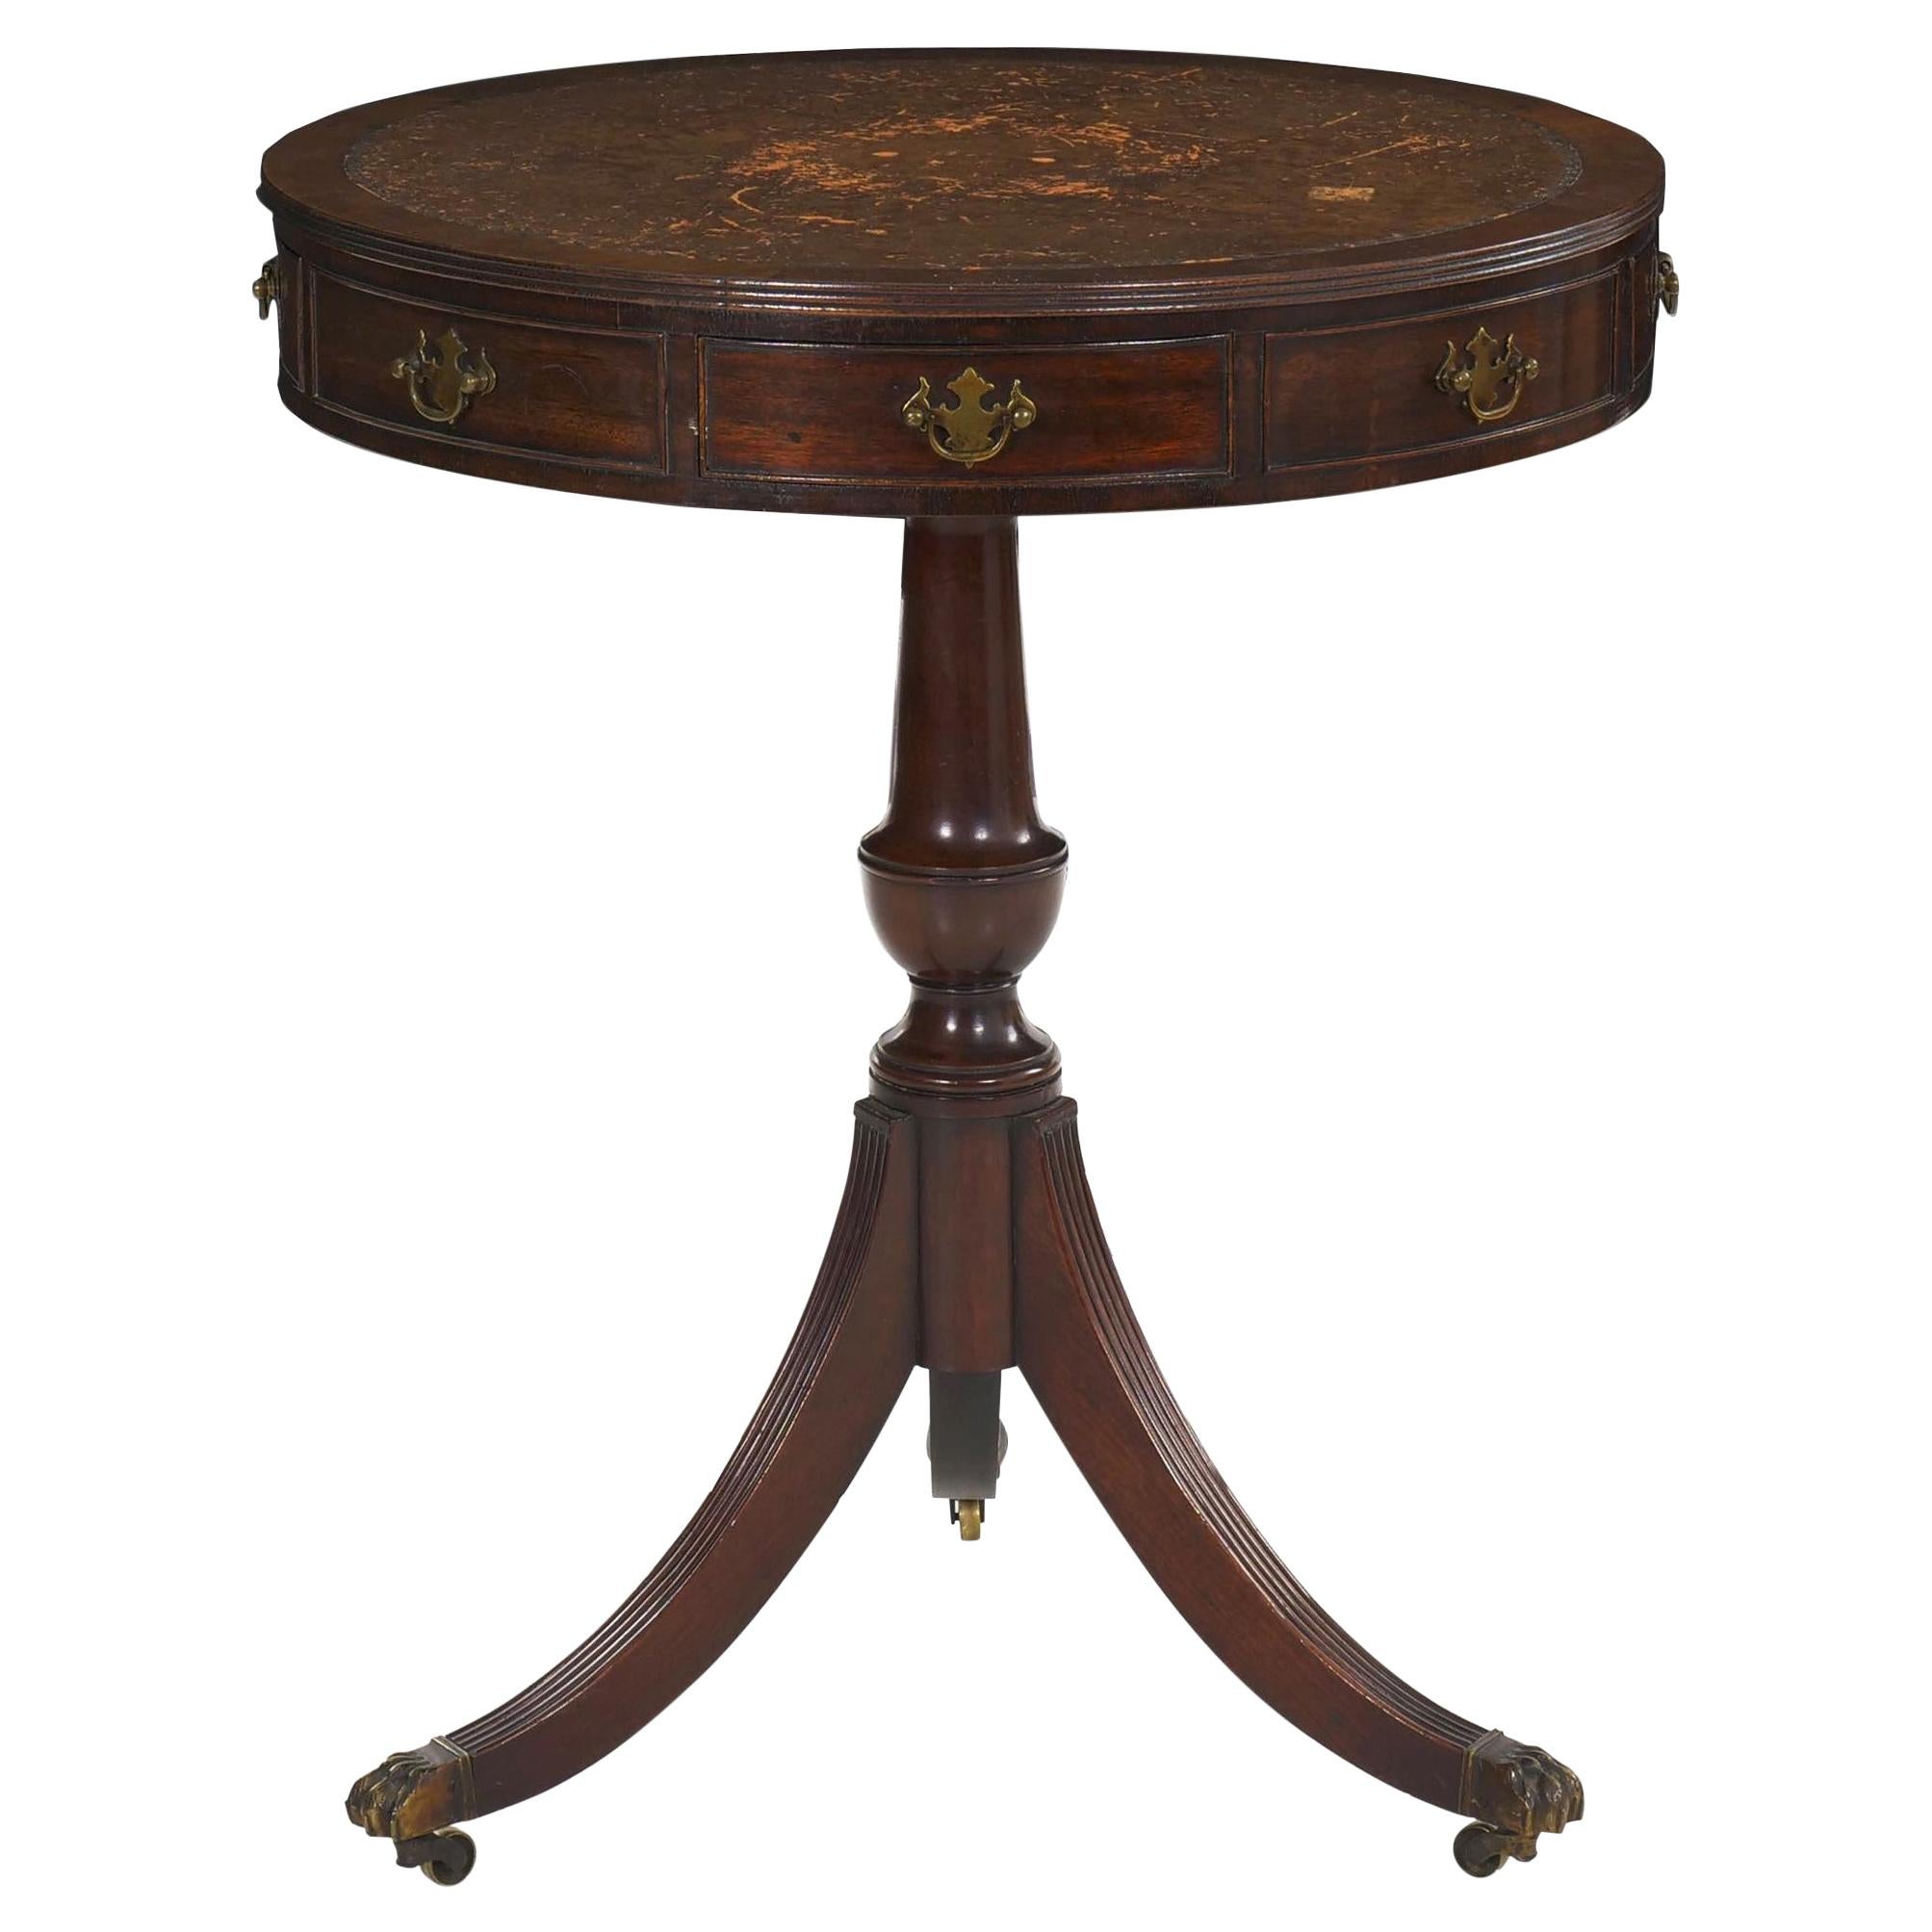 English Regency Style Antique Mahogany and Leather Drum-Top Accent Table